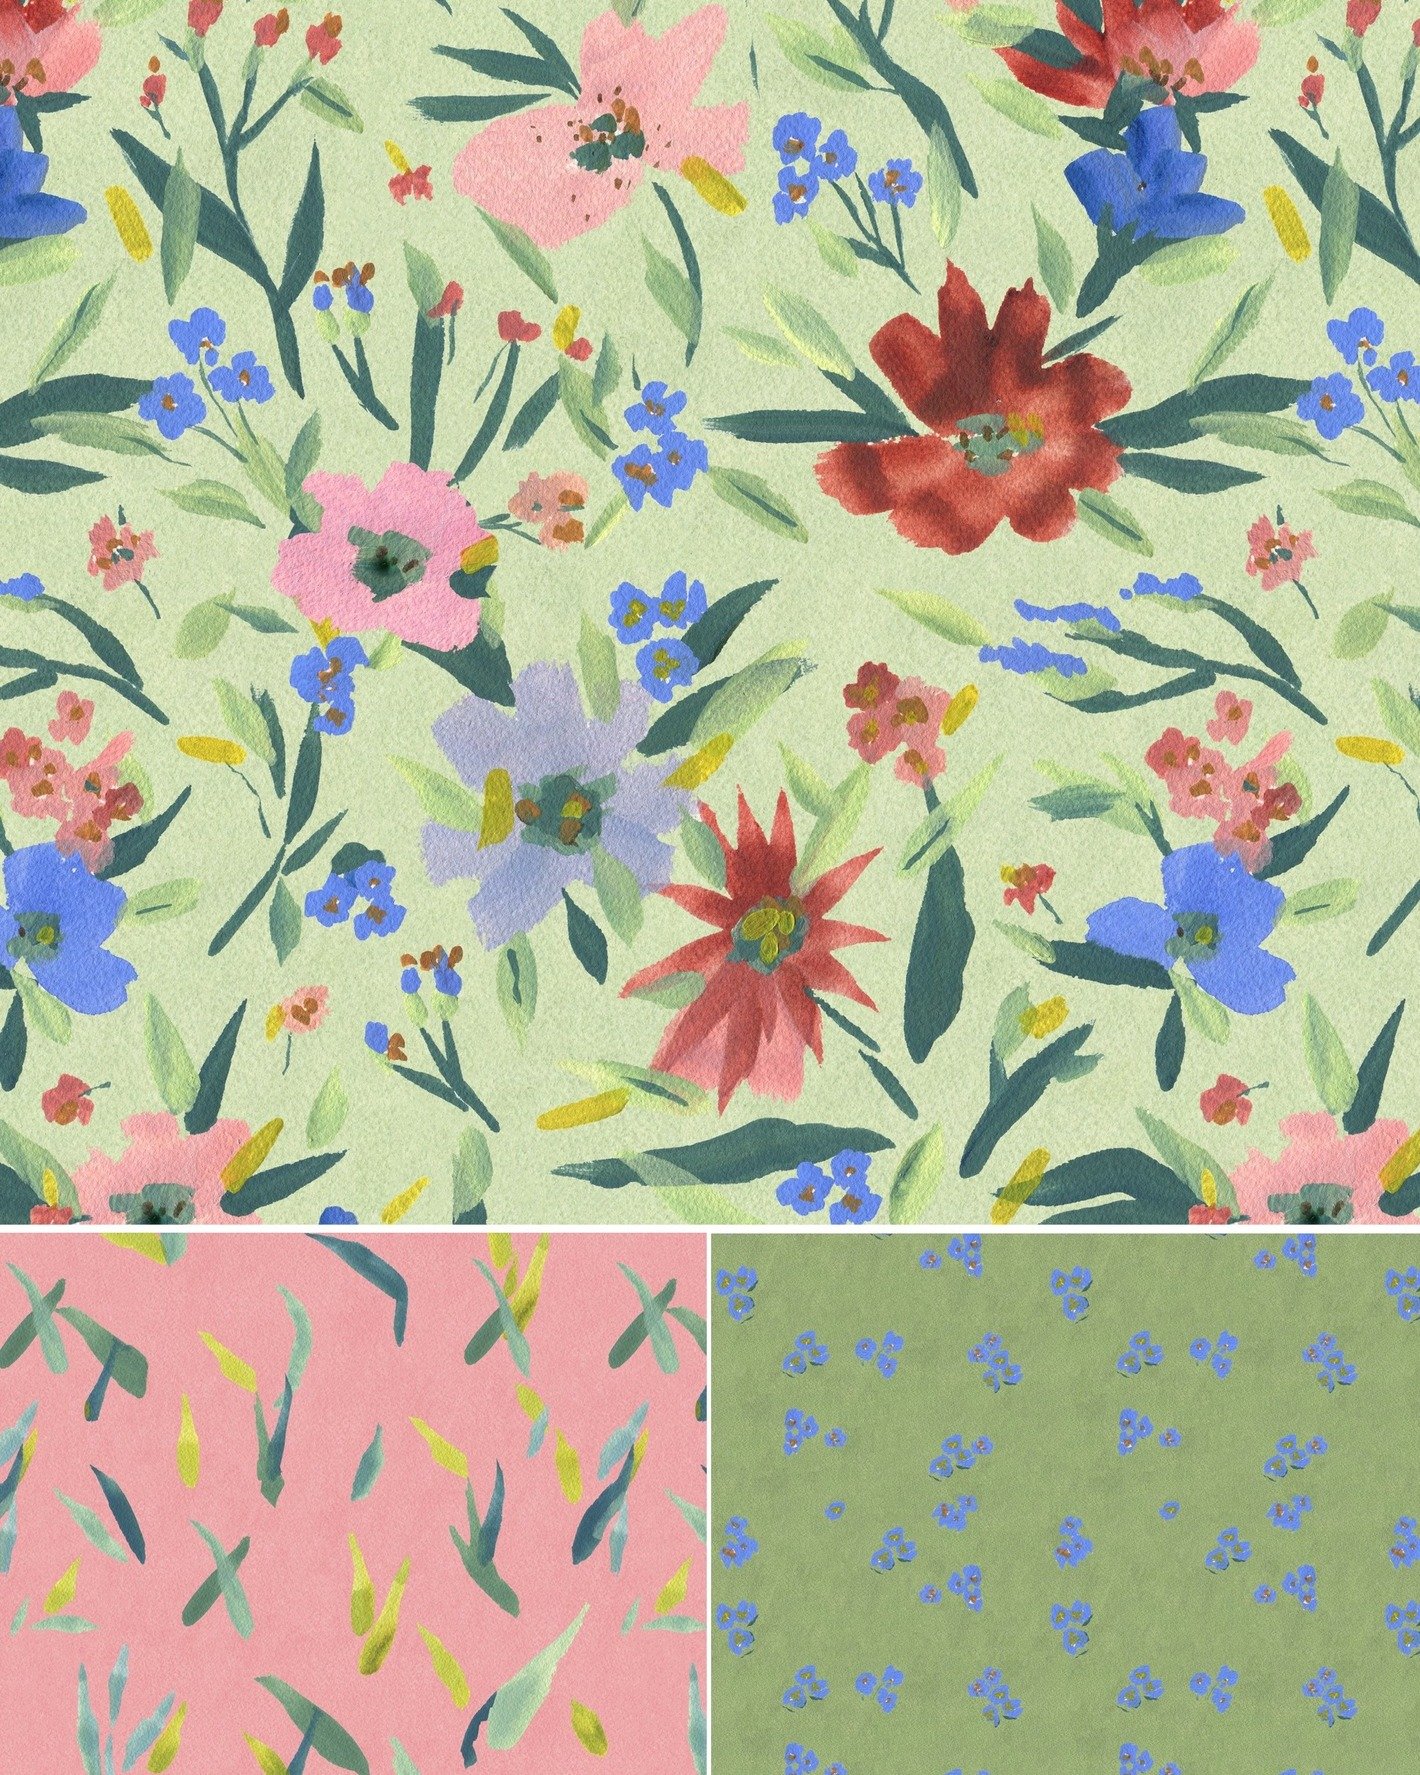 I'm hoping these April showers bring May flowers as lovely as these by @rachel_grant_art 

#surfacedesign #artlicensing #tippitytopbestestartever #artagent #jennifernelsonartists #artagency #surfacedesignagency #floral #floraldesign #surfacedesigncom